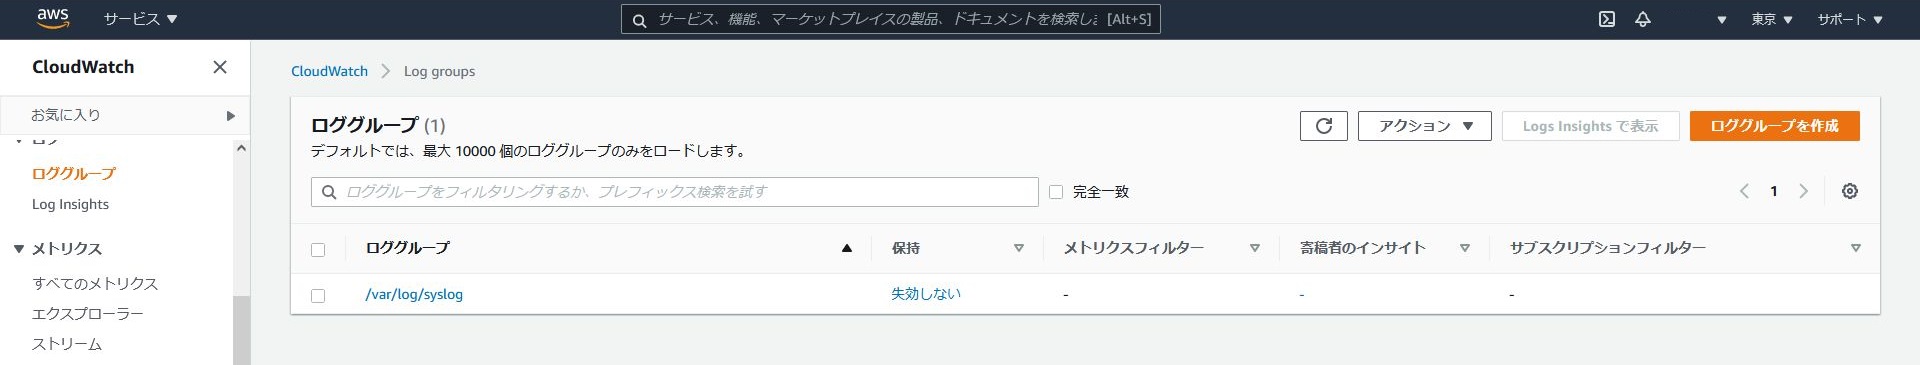 CloudWatch ロググループ